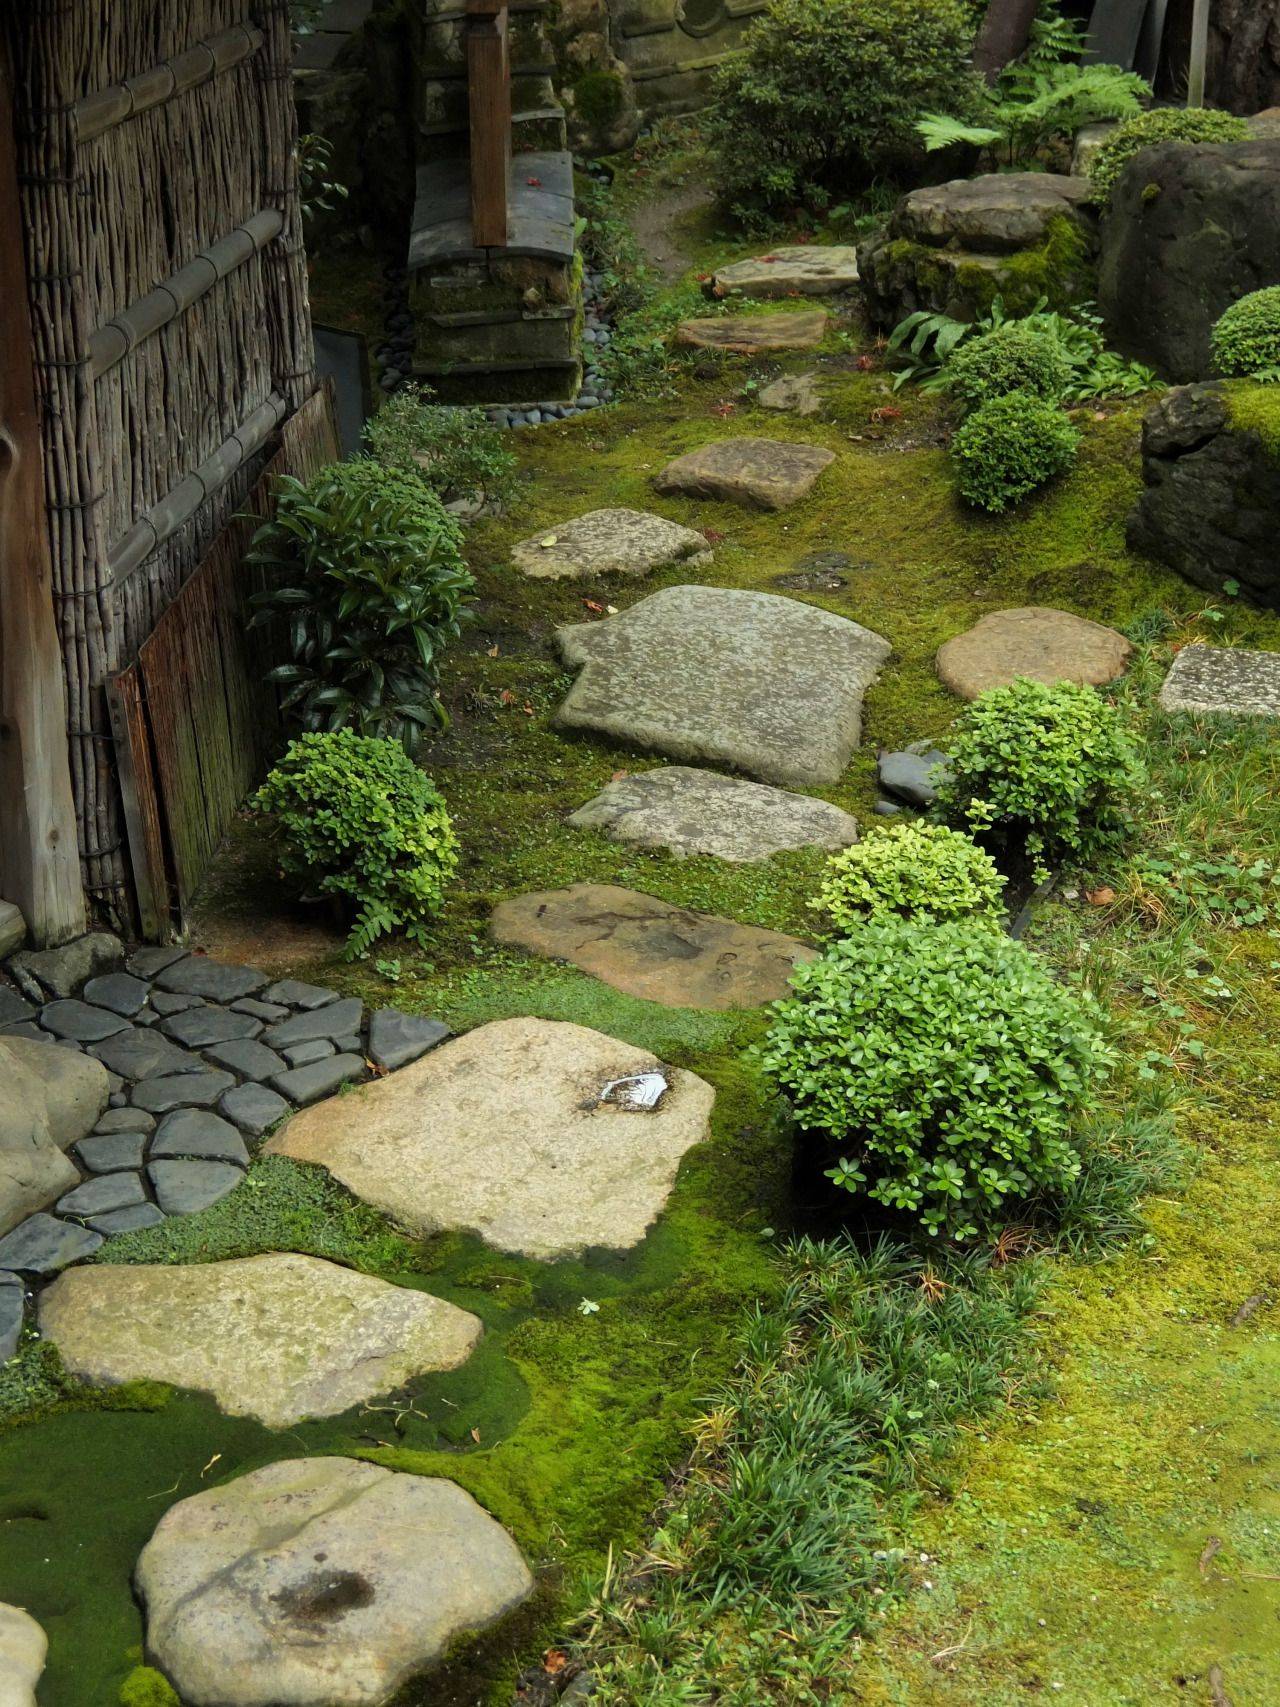 Creative Japanese Garden Designs You Can Build To Accent Your